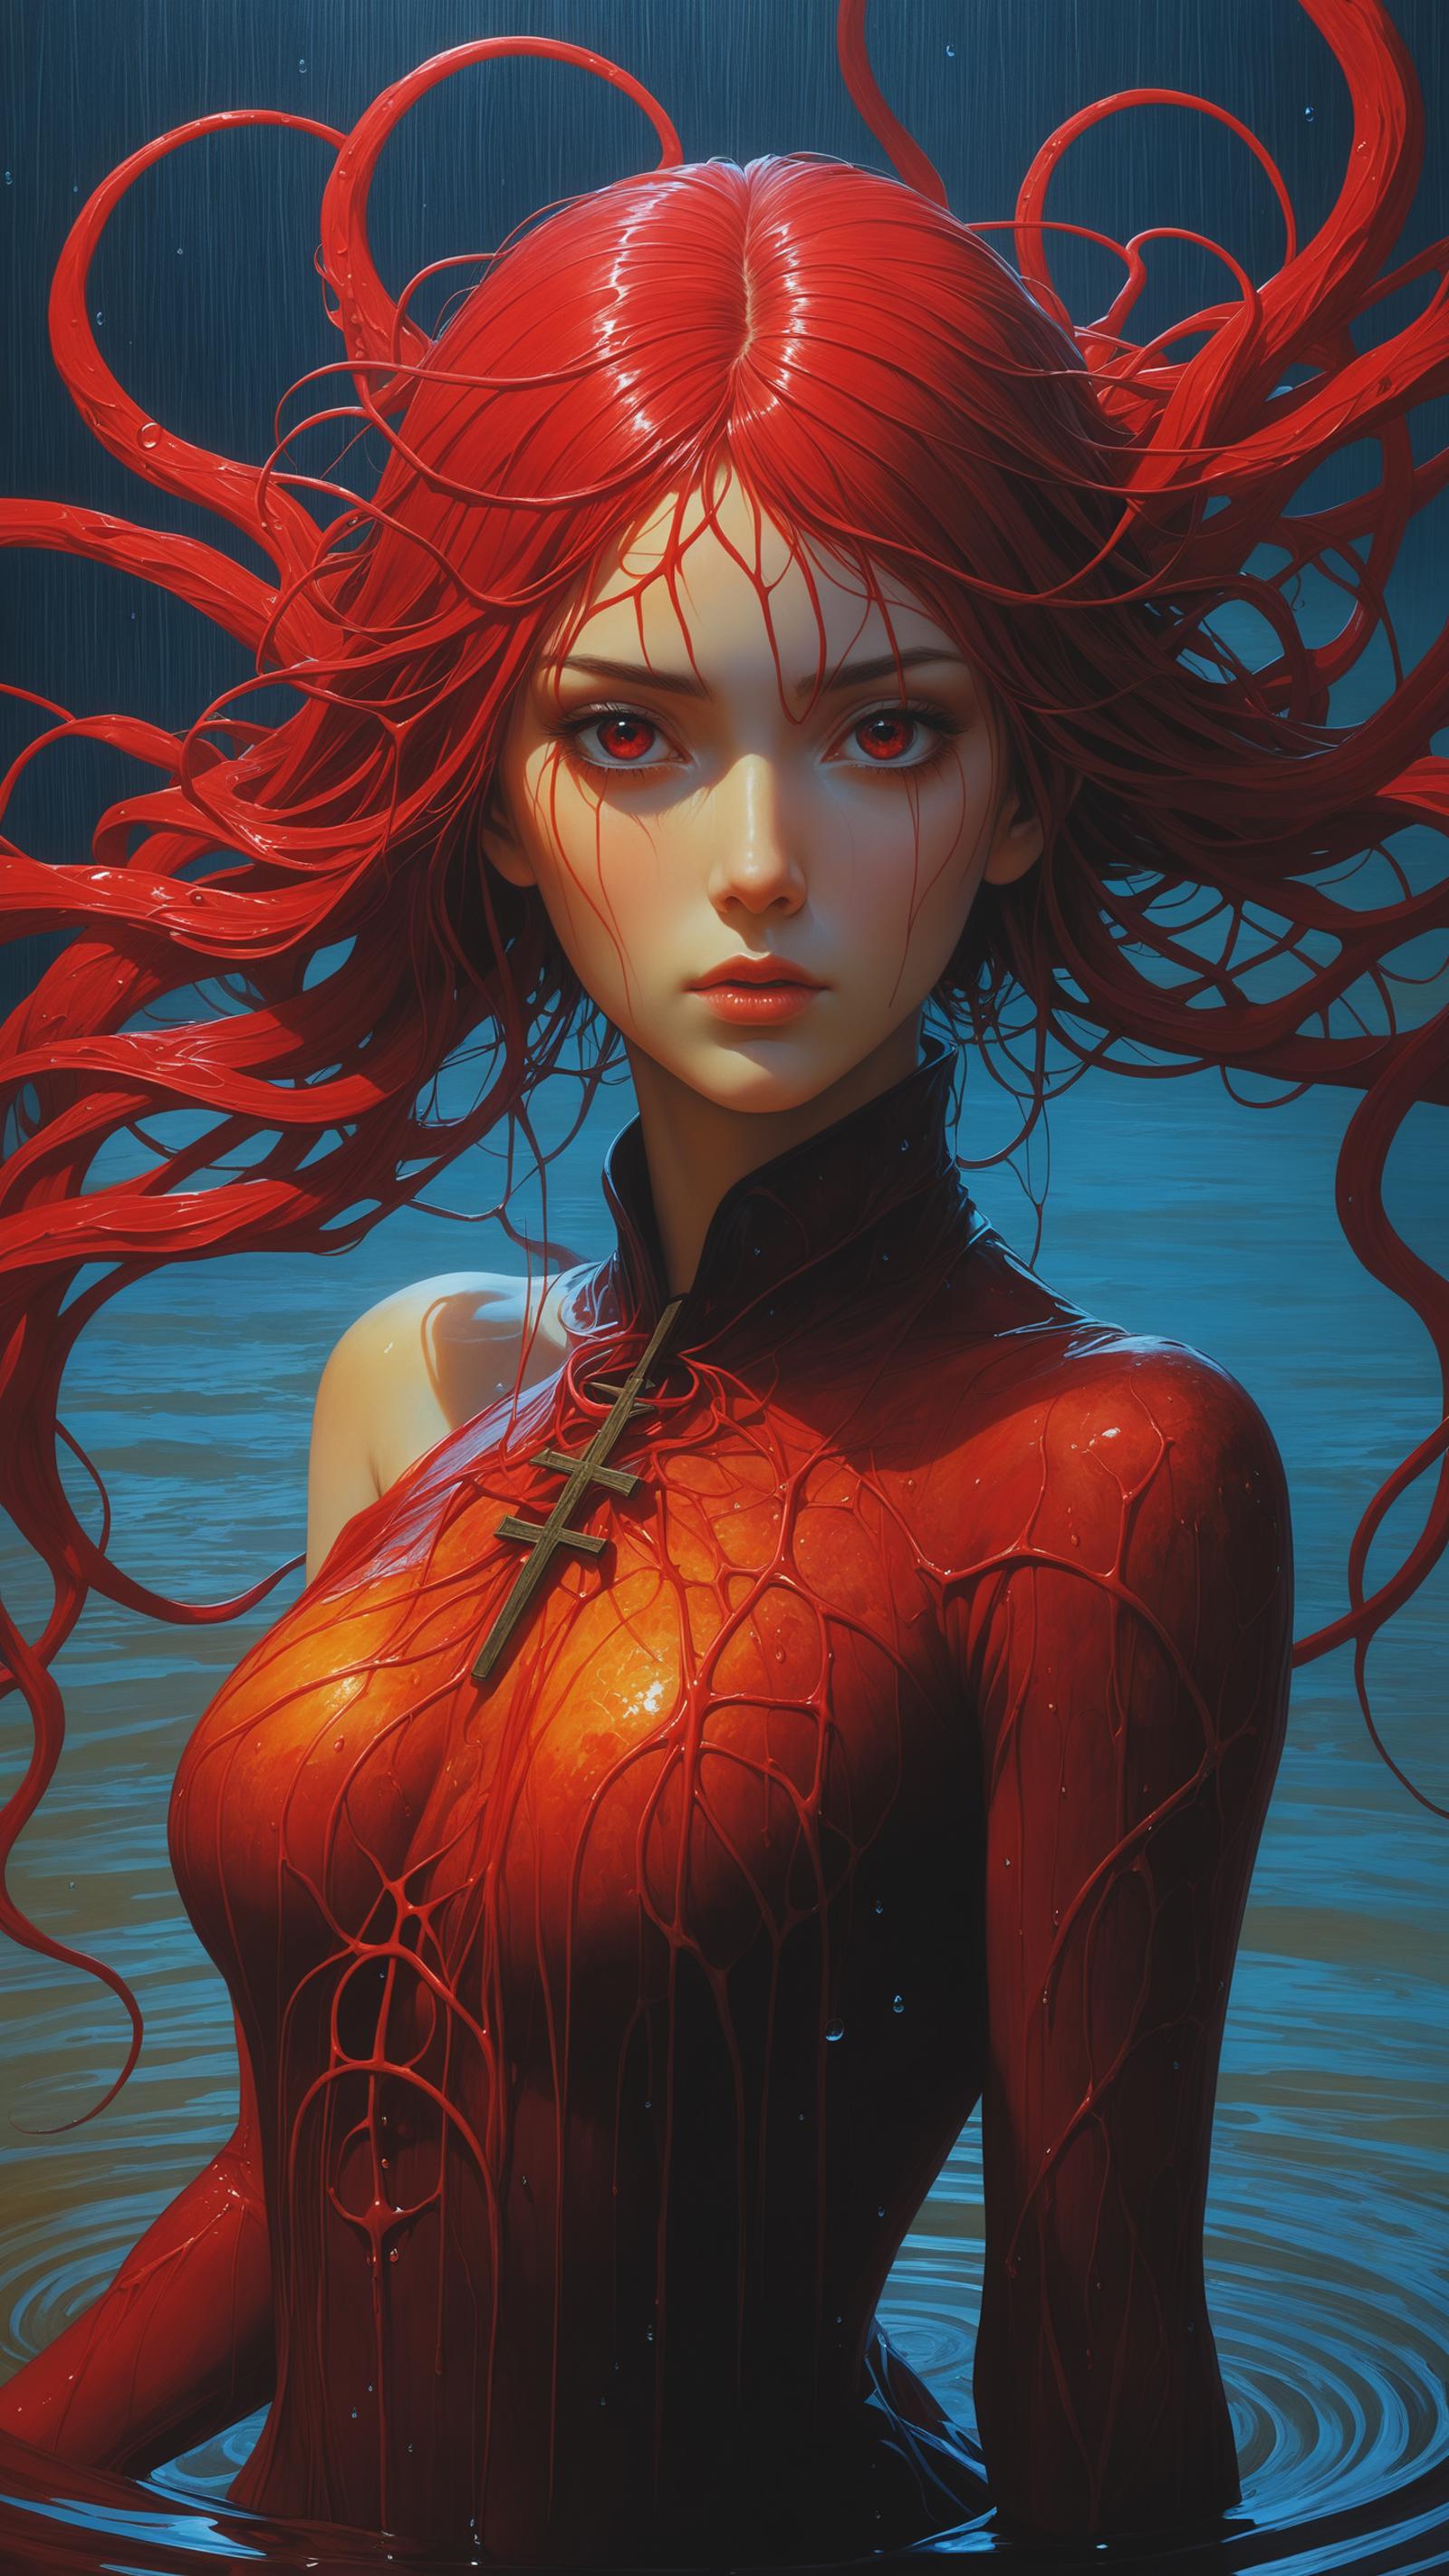 Anime-style painting of a woman with red hair and red clothing, wearing a cross around her neck.